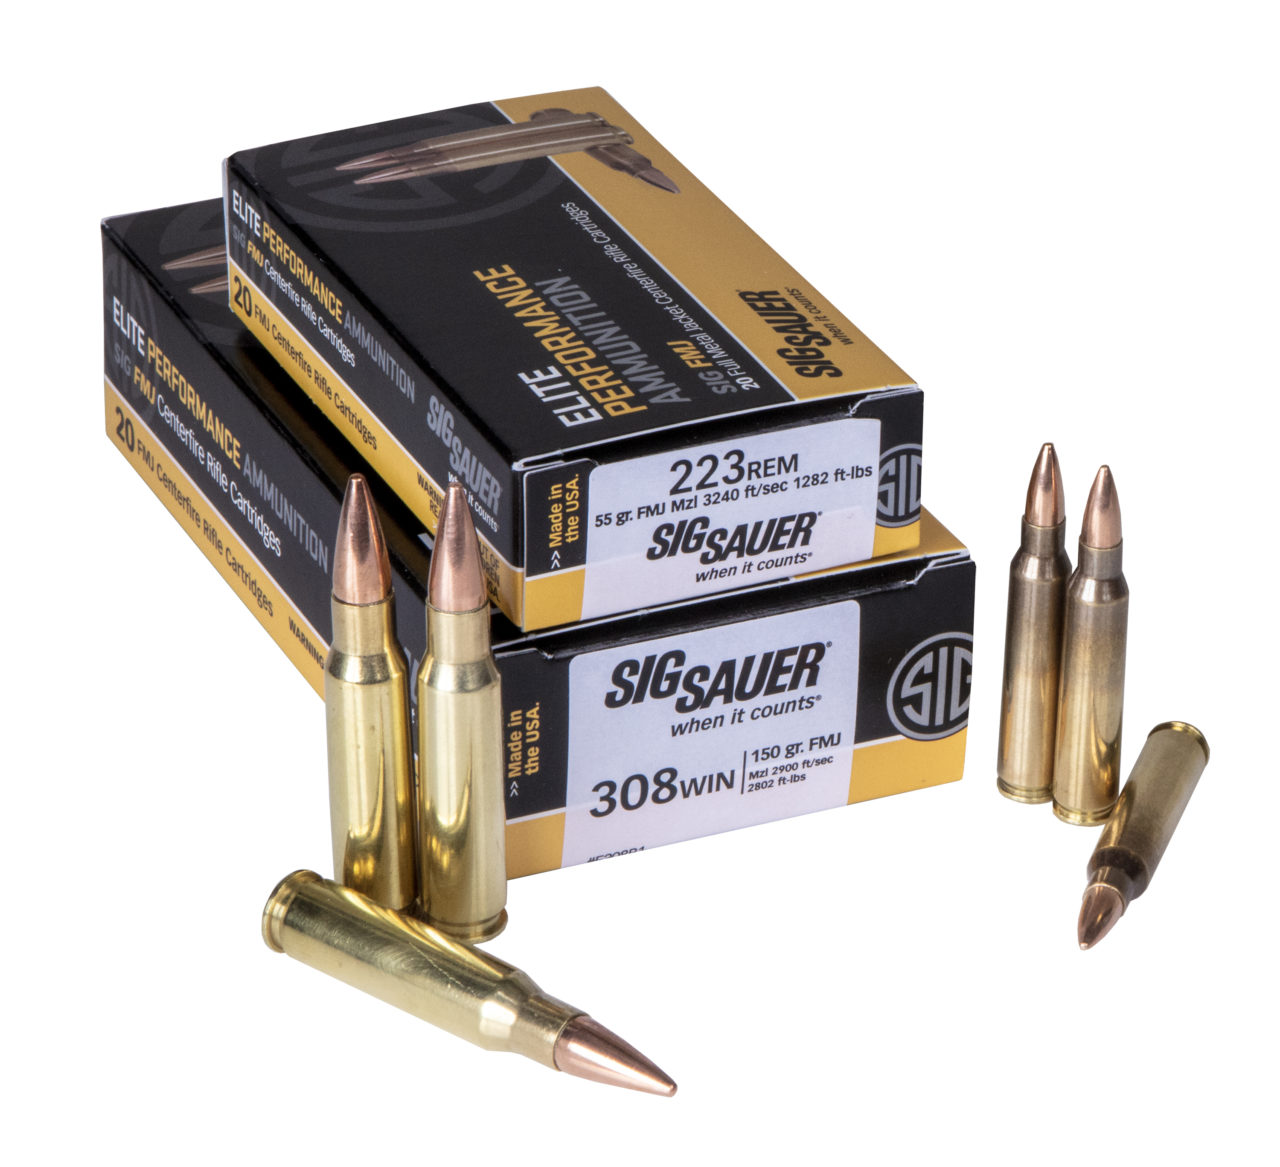 SIG SAUER Introduces New 223 Rem and 308 Win SIG FMJ Rifle Ammunition